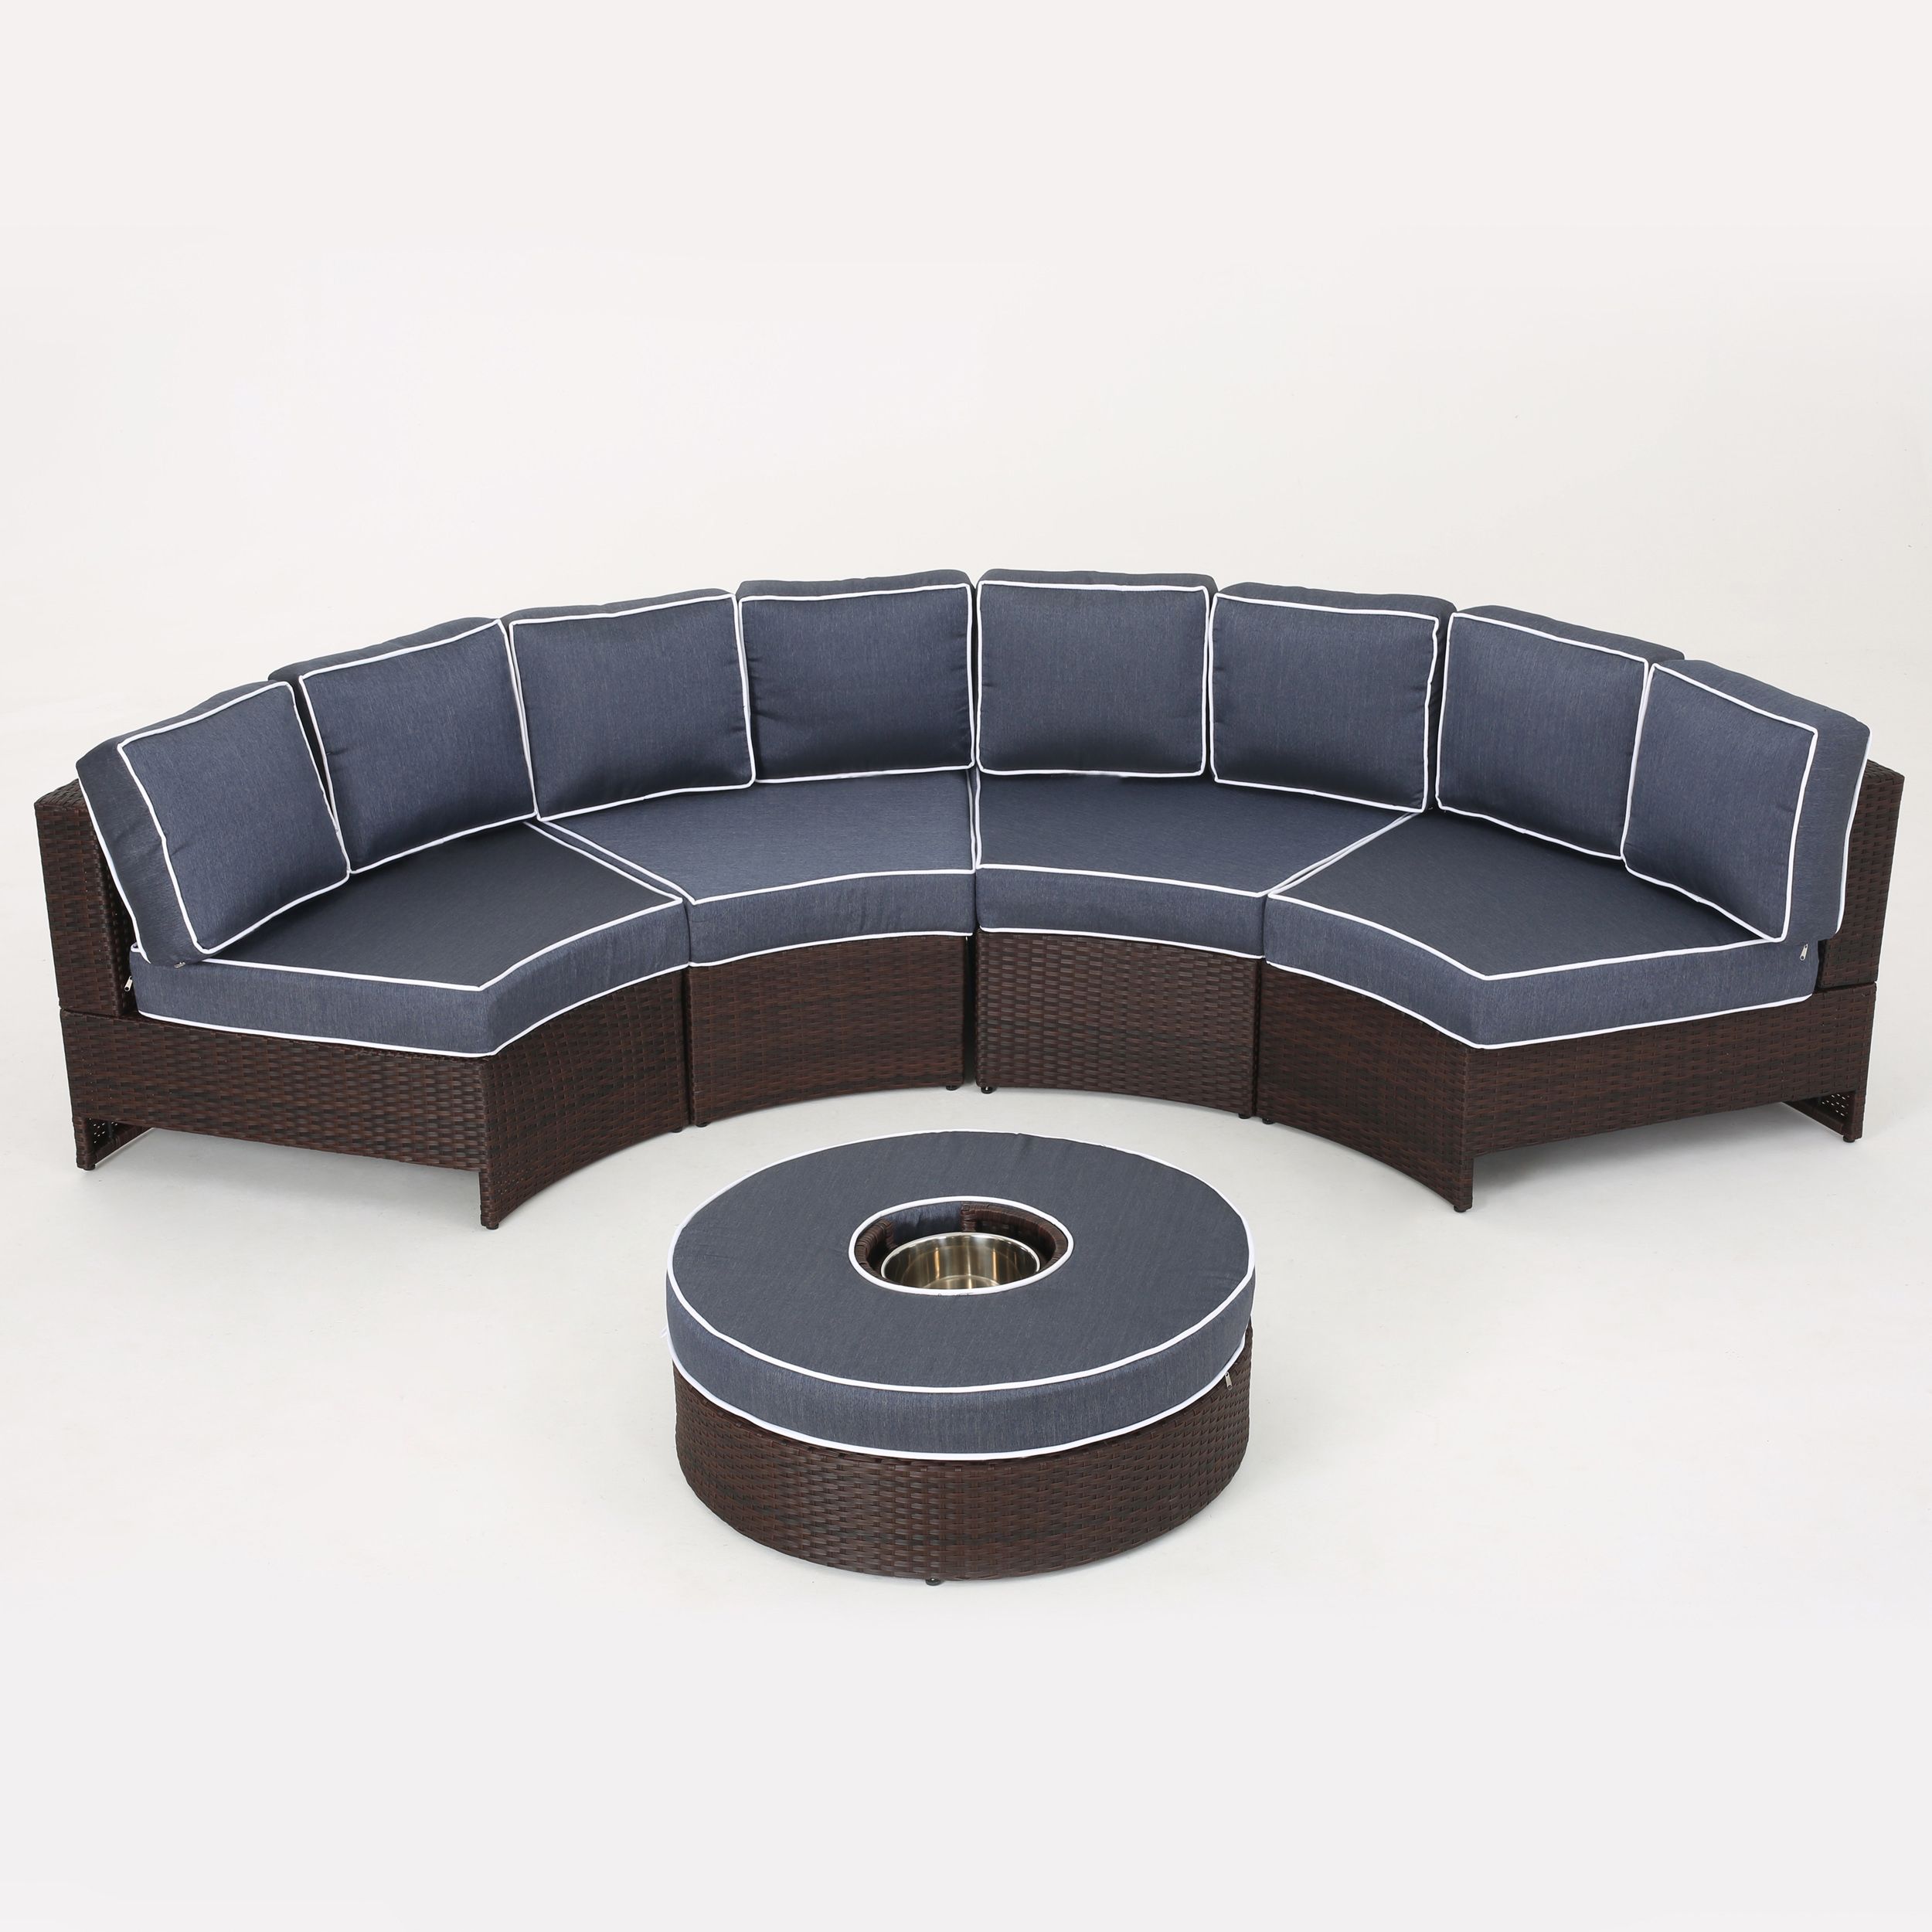 Riviera Ponza Outdoor Wicker 5 Piece Semicircular Sectional Sofa Regarding Navy Outdoor Seating Sectional Patio Sets (View 10 of 15)